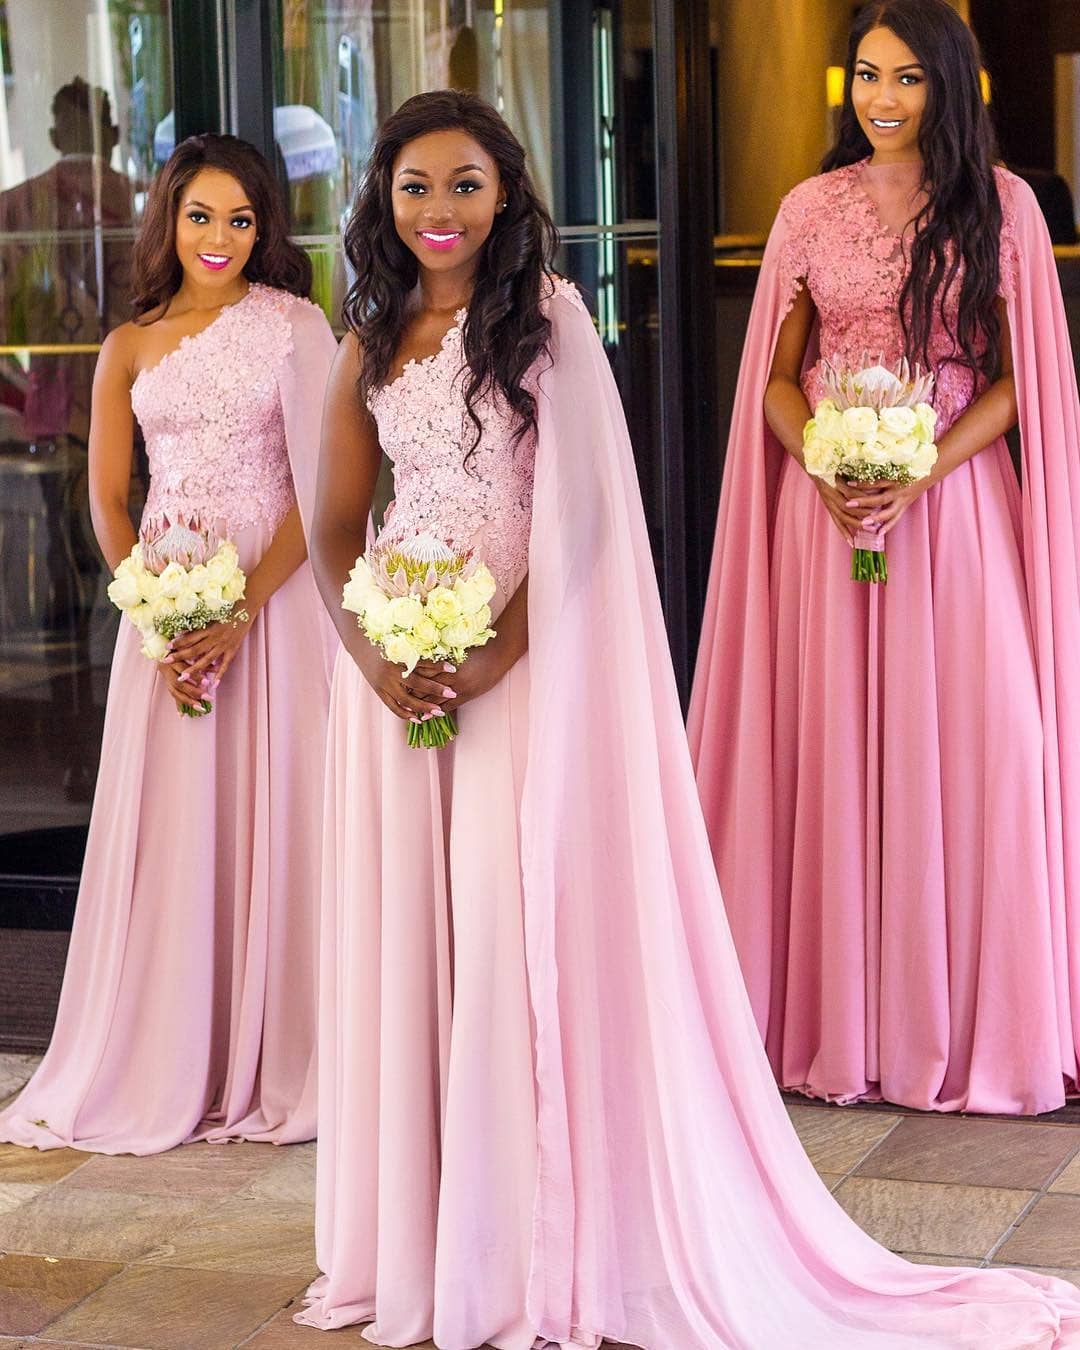 The Bride's Entourage In Beautiful Bridesmaids Styles